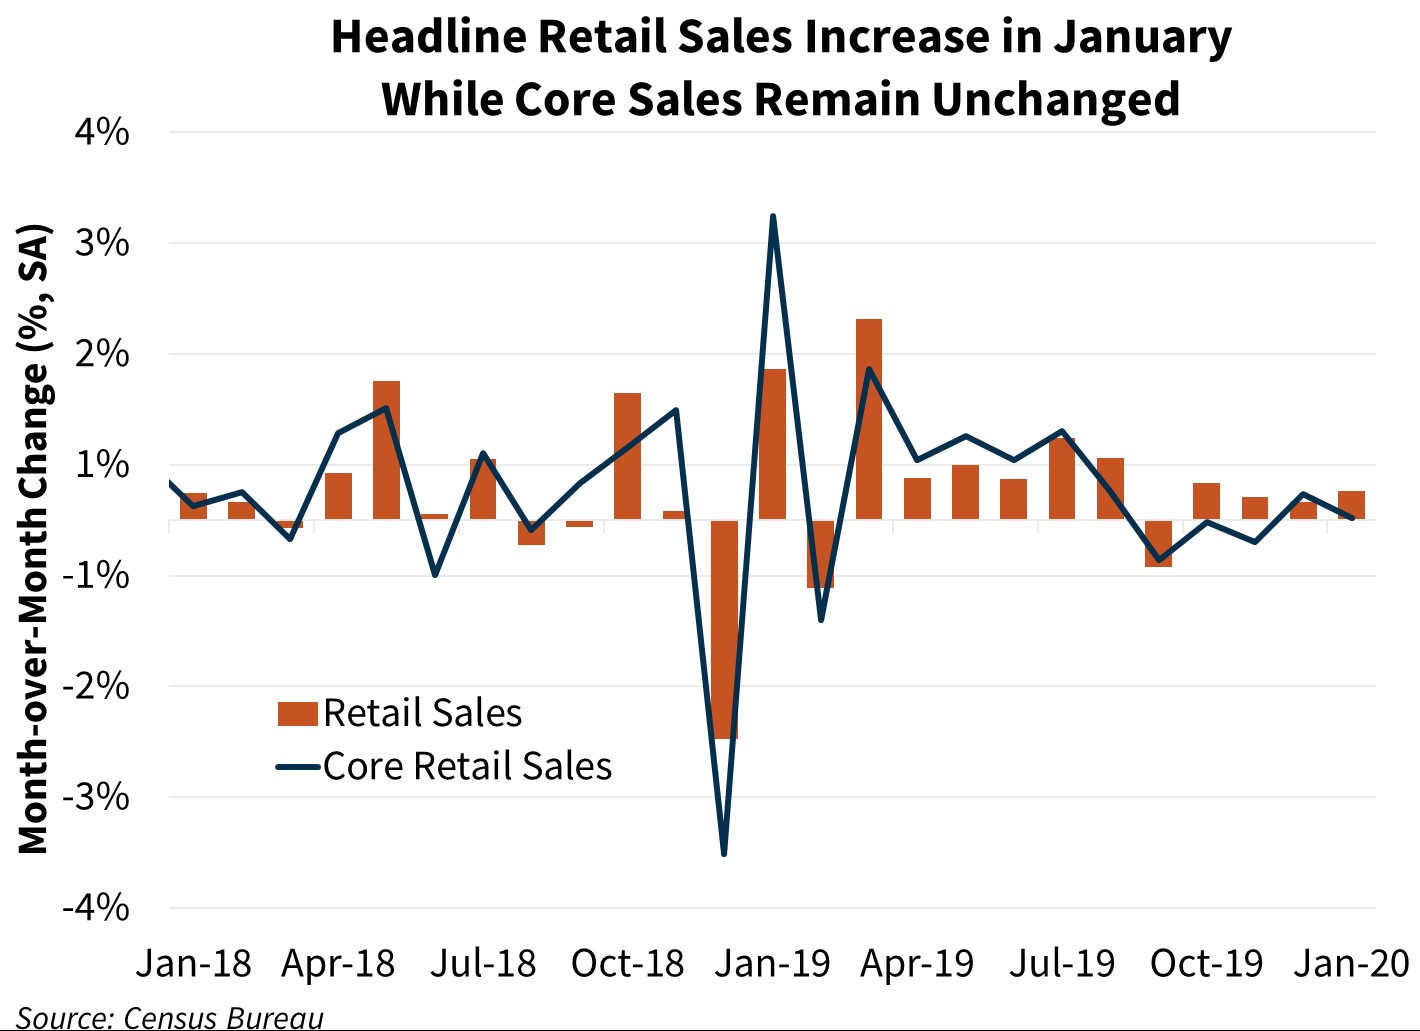 Headline Retail Sales Increase in January While Core Sales Remain Unchanged